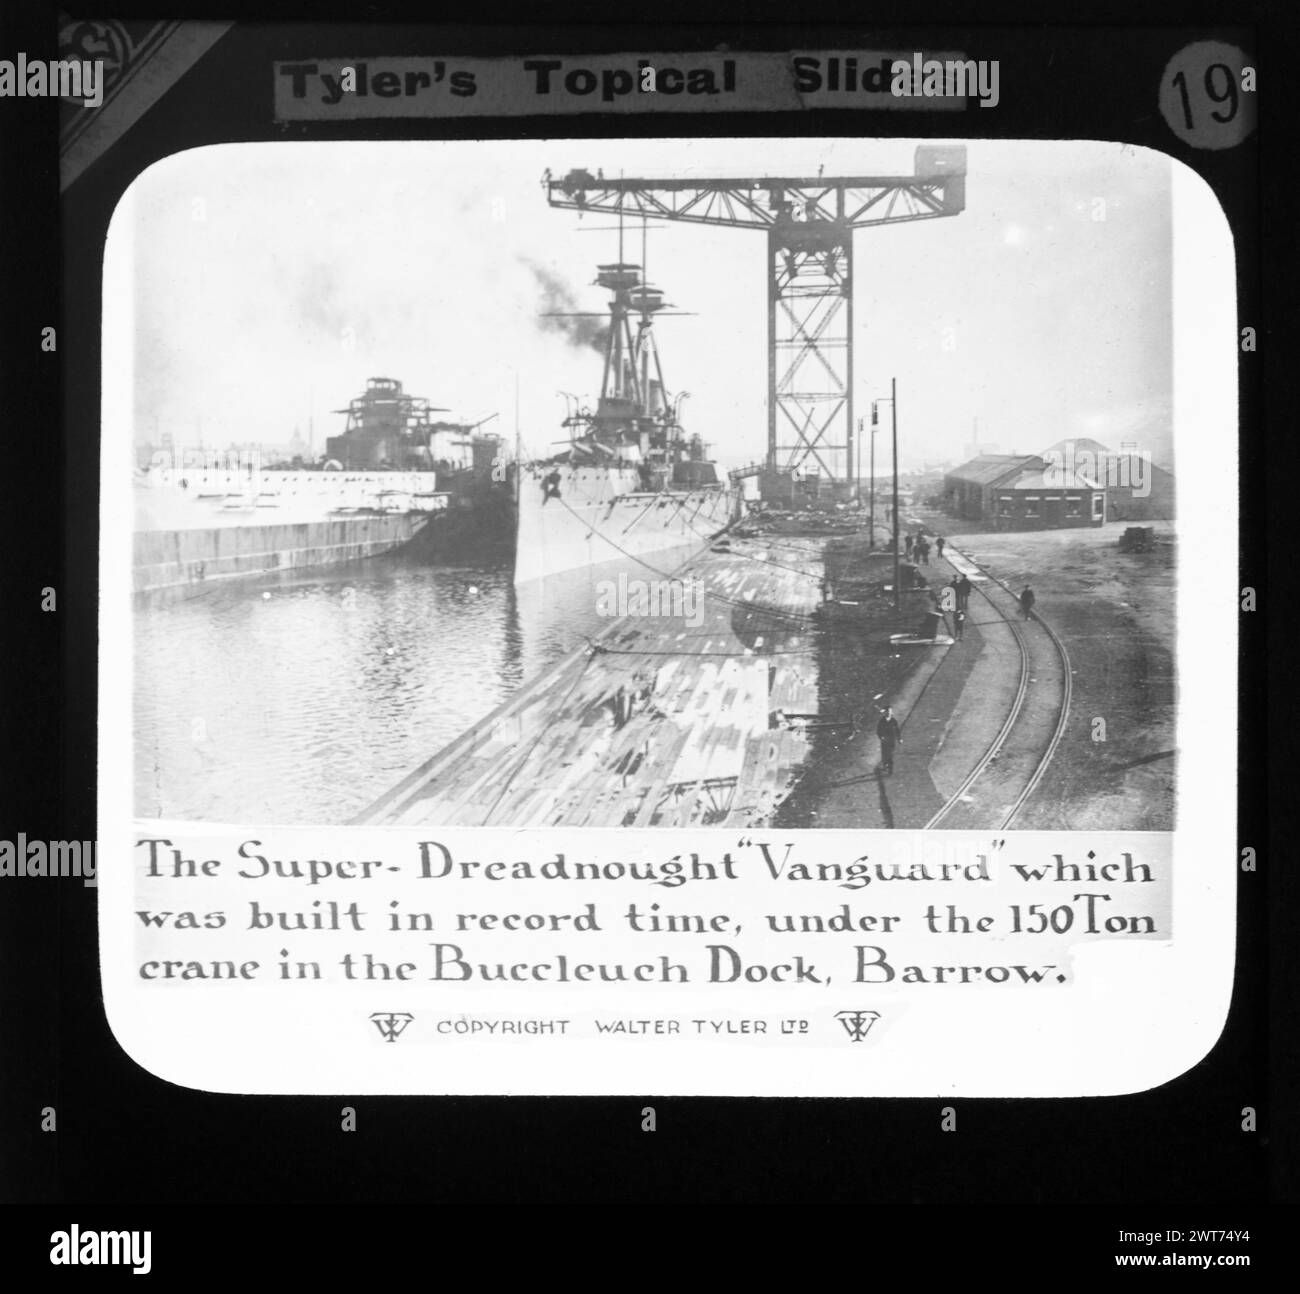 The Super-Dreadnought 'Vanguard' which was built in record time, under the 150 ton crane in the Buccleeuch Dock, Barrow, Walter Tyler Ltd magic lantern slide HMS Vanguard 1909 Stock Photo